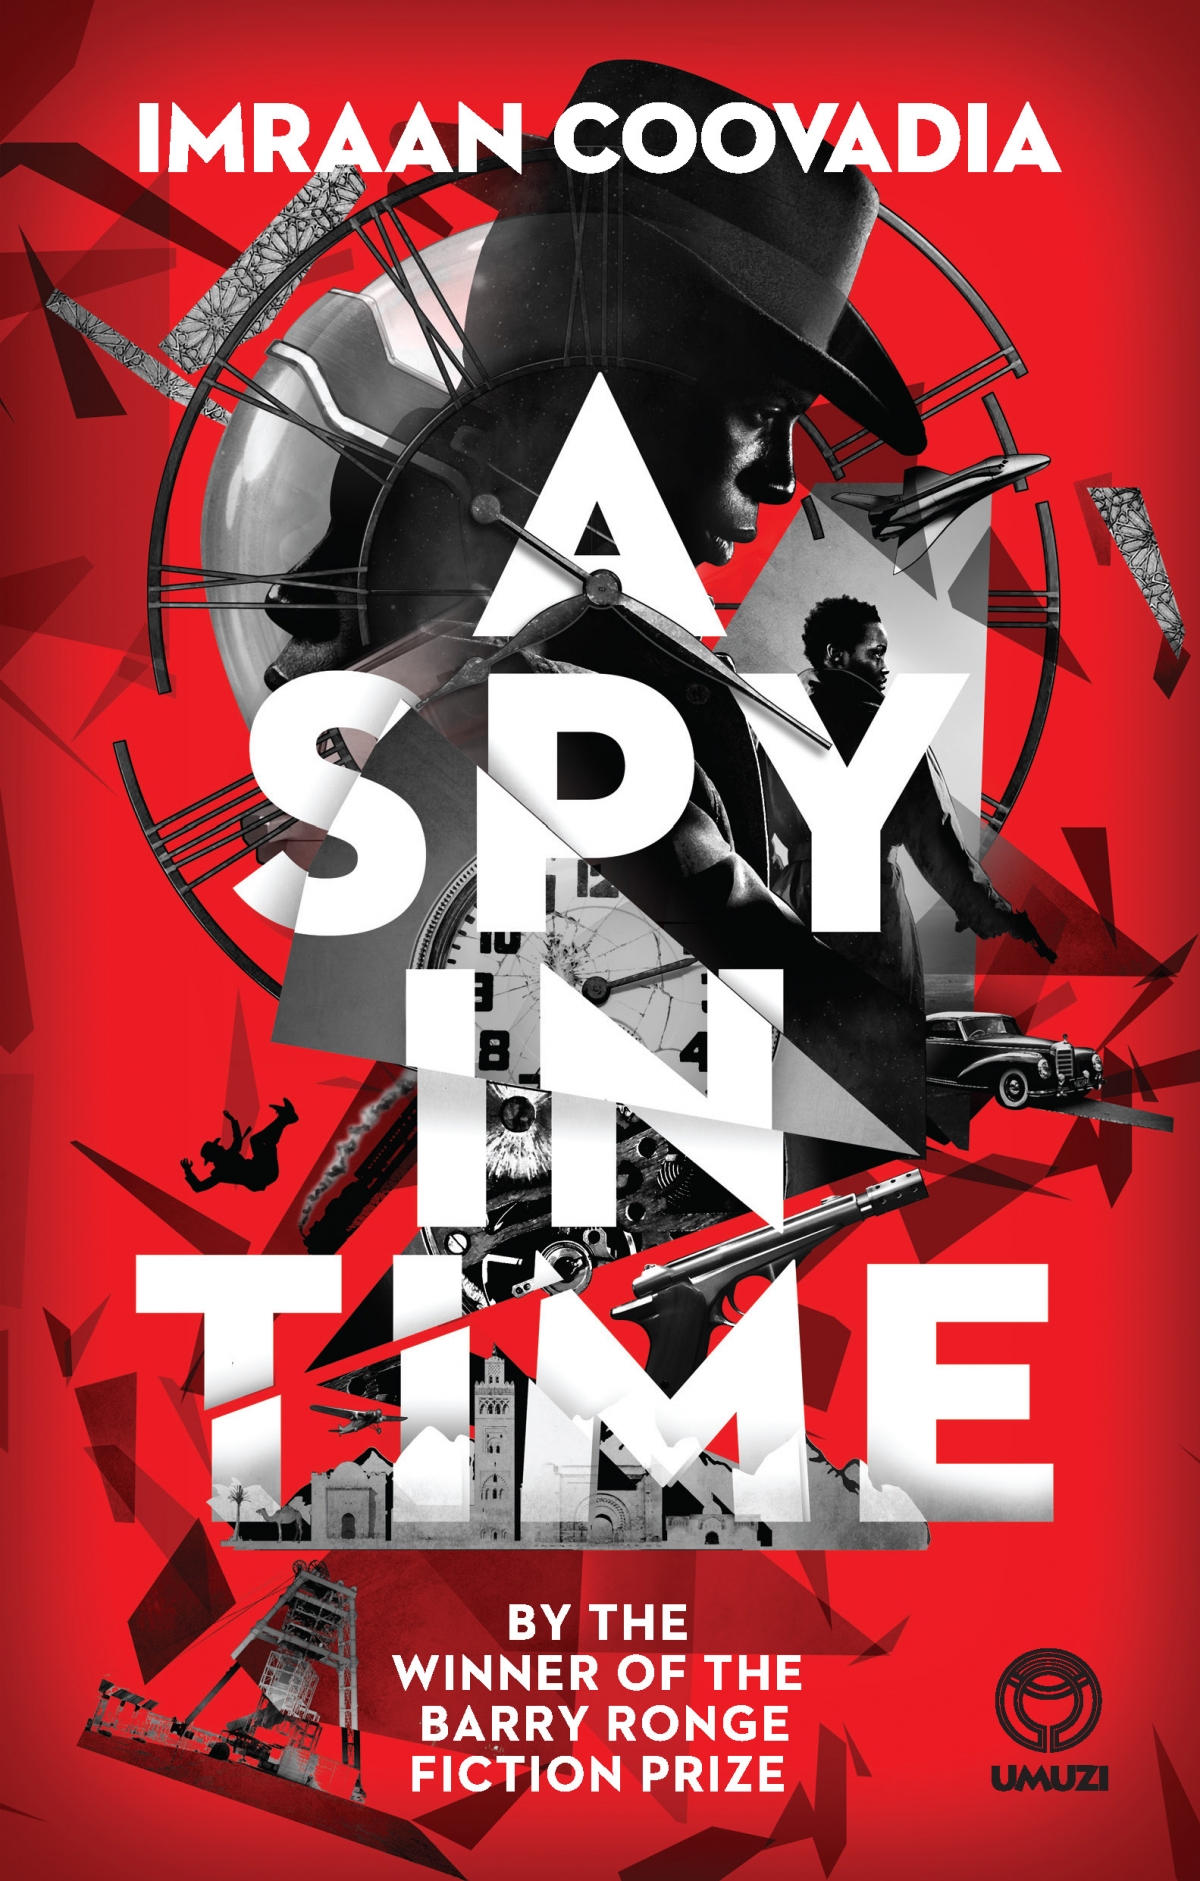 A Spy in Time